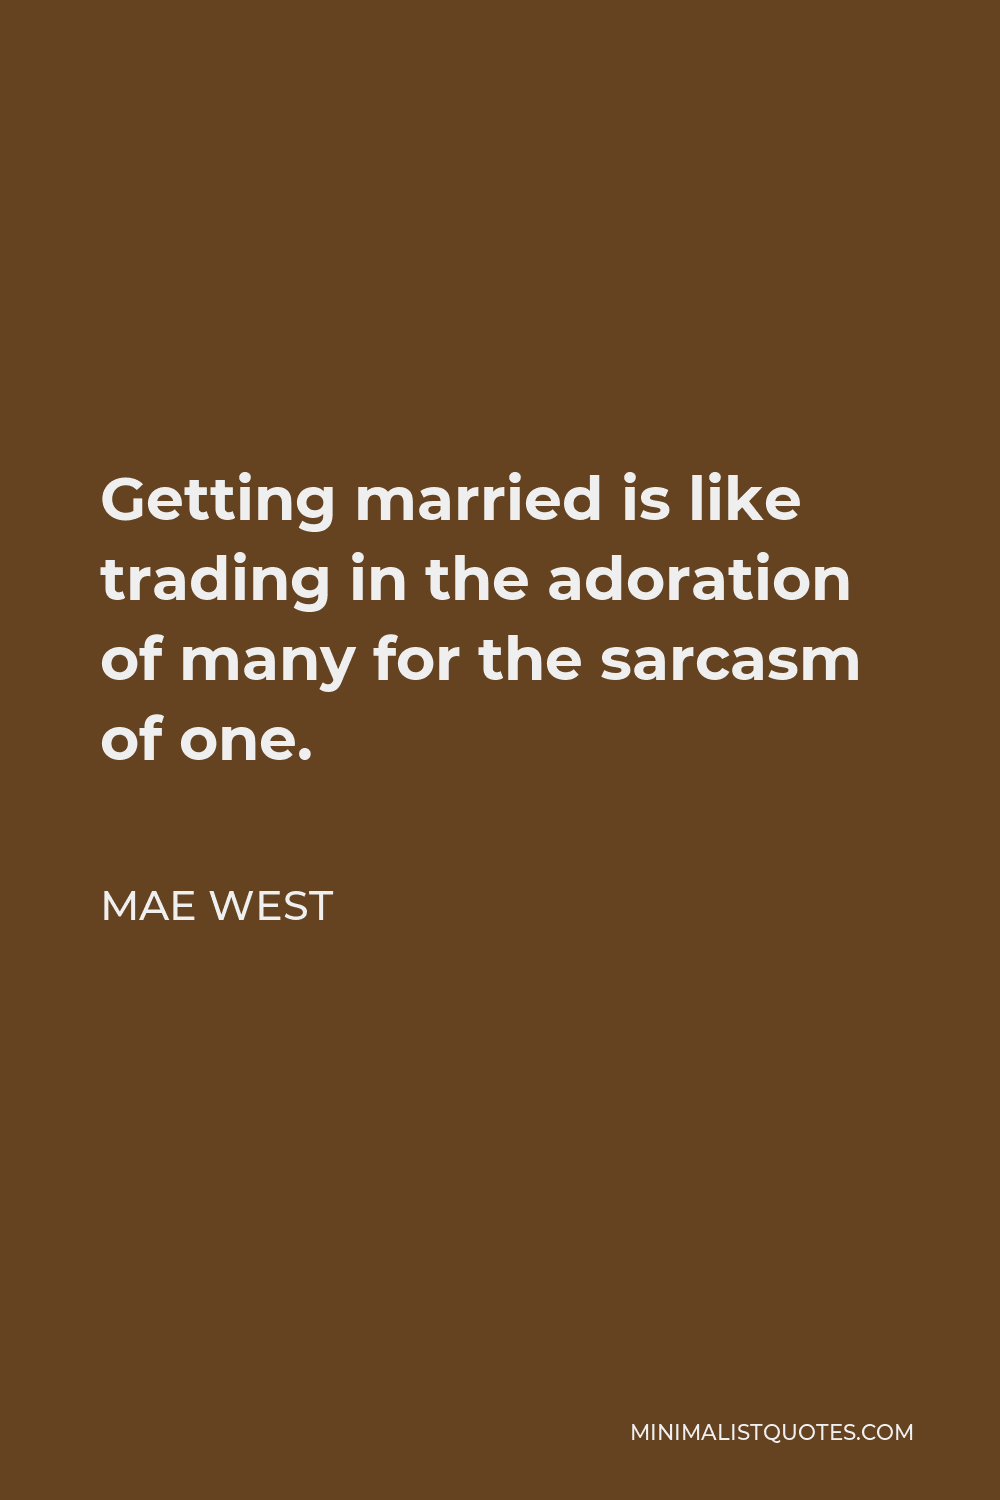 Mae West Quote: Getting married is like trading in the adoration of ...